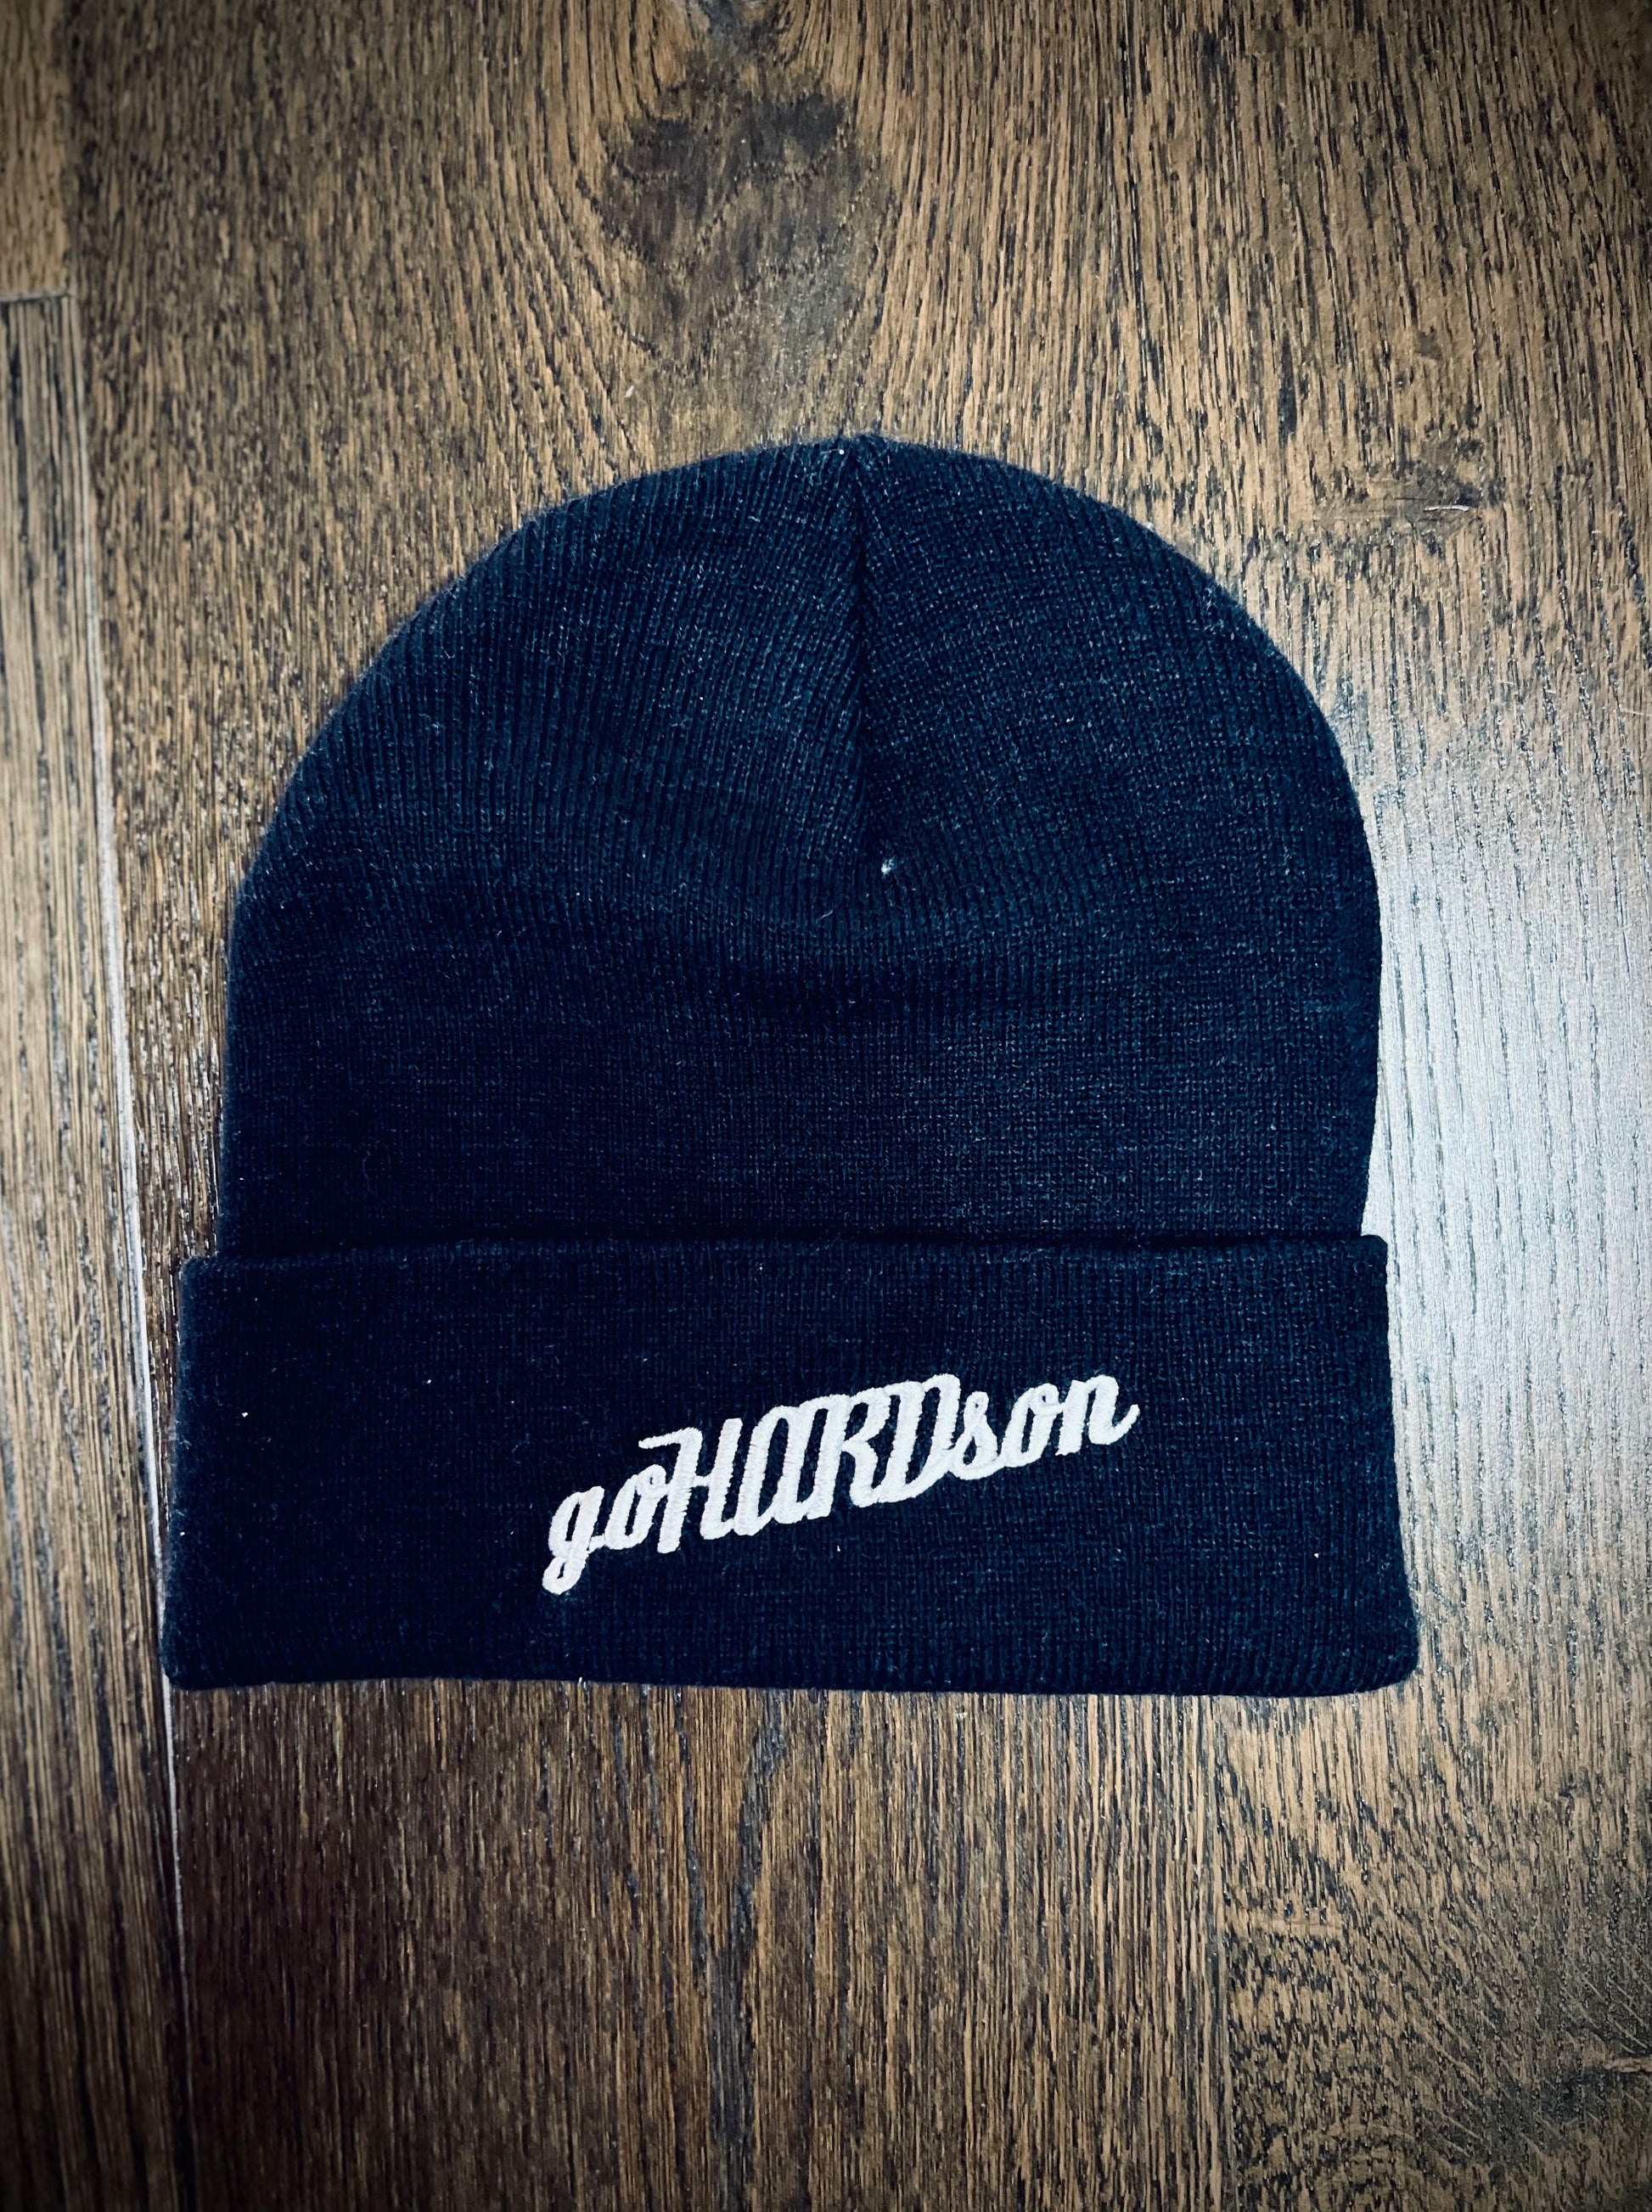 goHARDson goHARD_Beanie streetwear mens fashion Beanie clothing hats accessories Authentic Winter 2022 Fortune Favours the brave